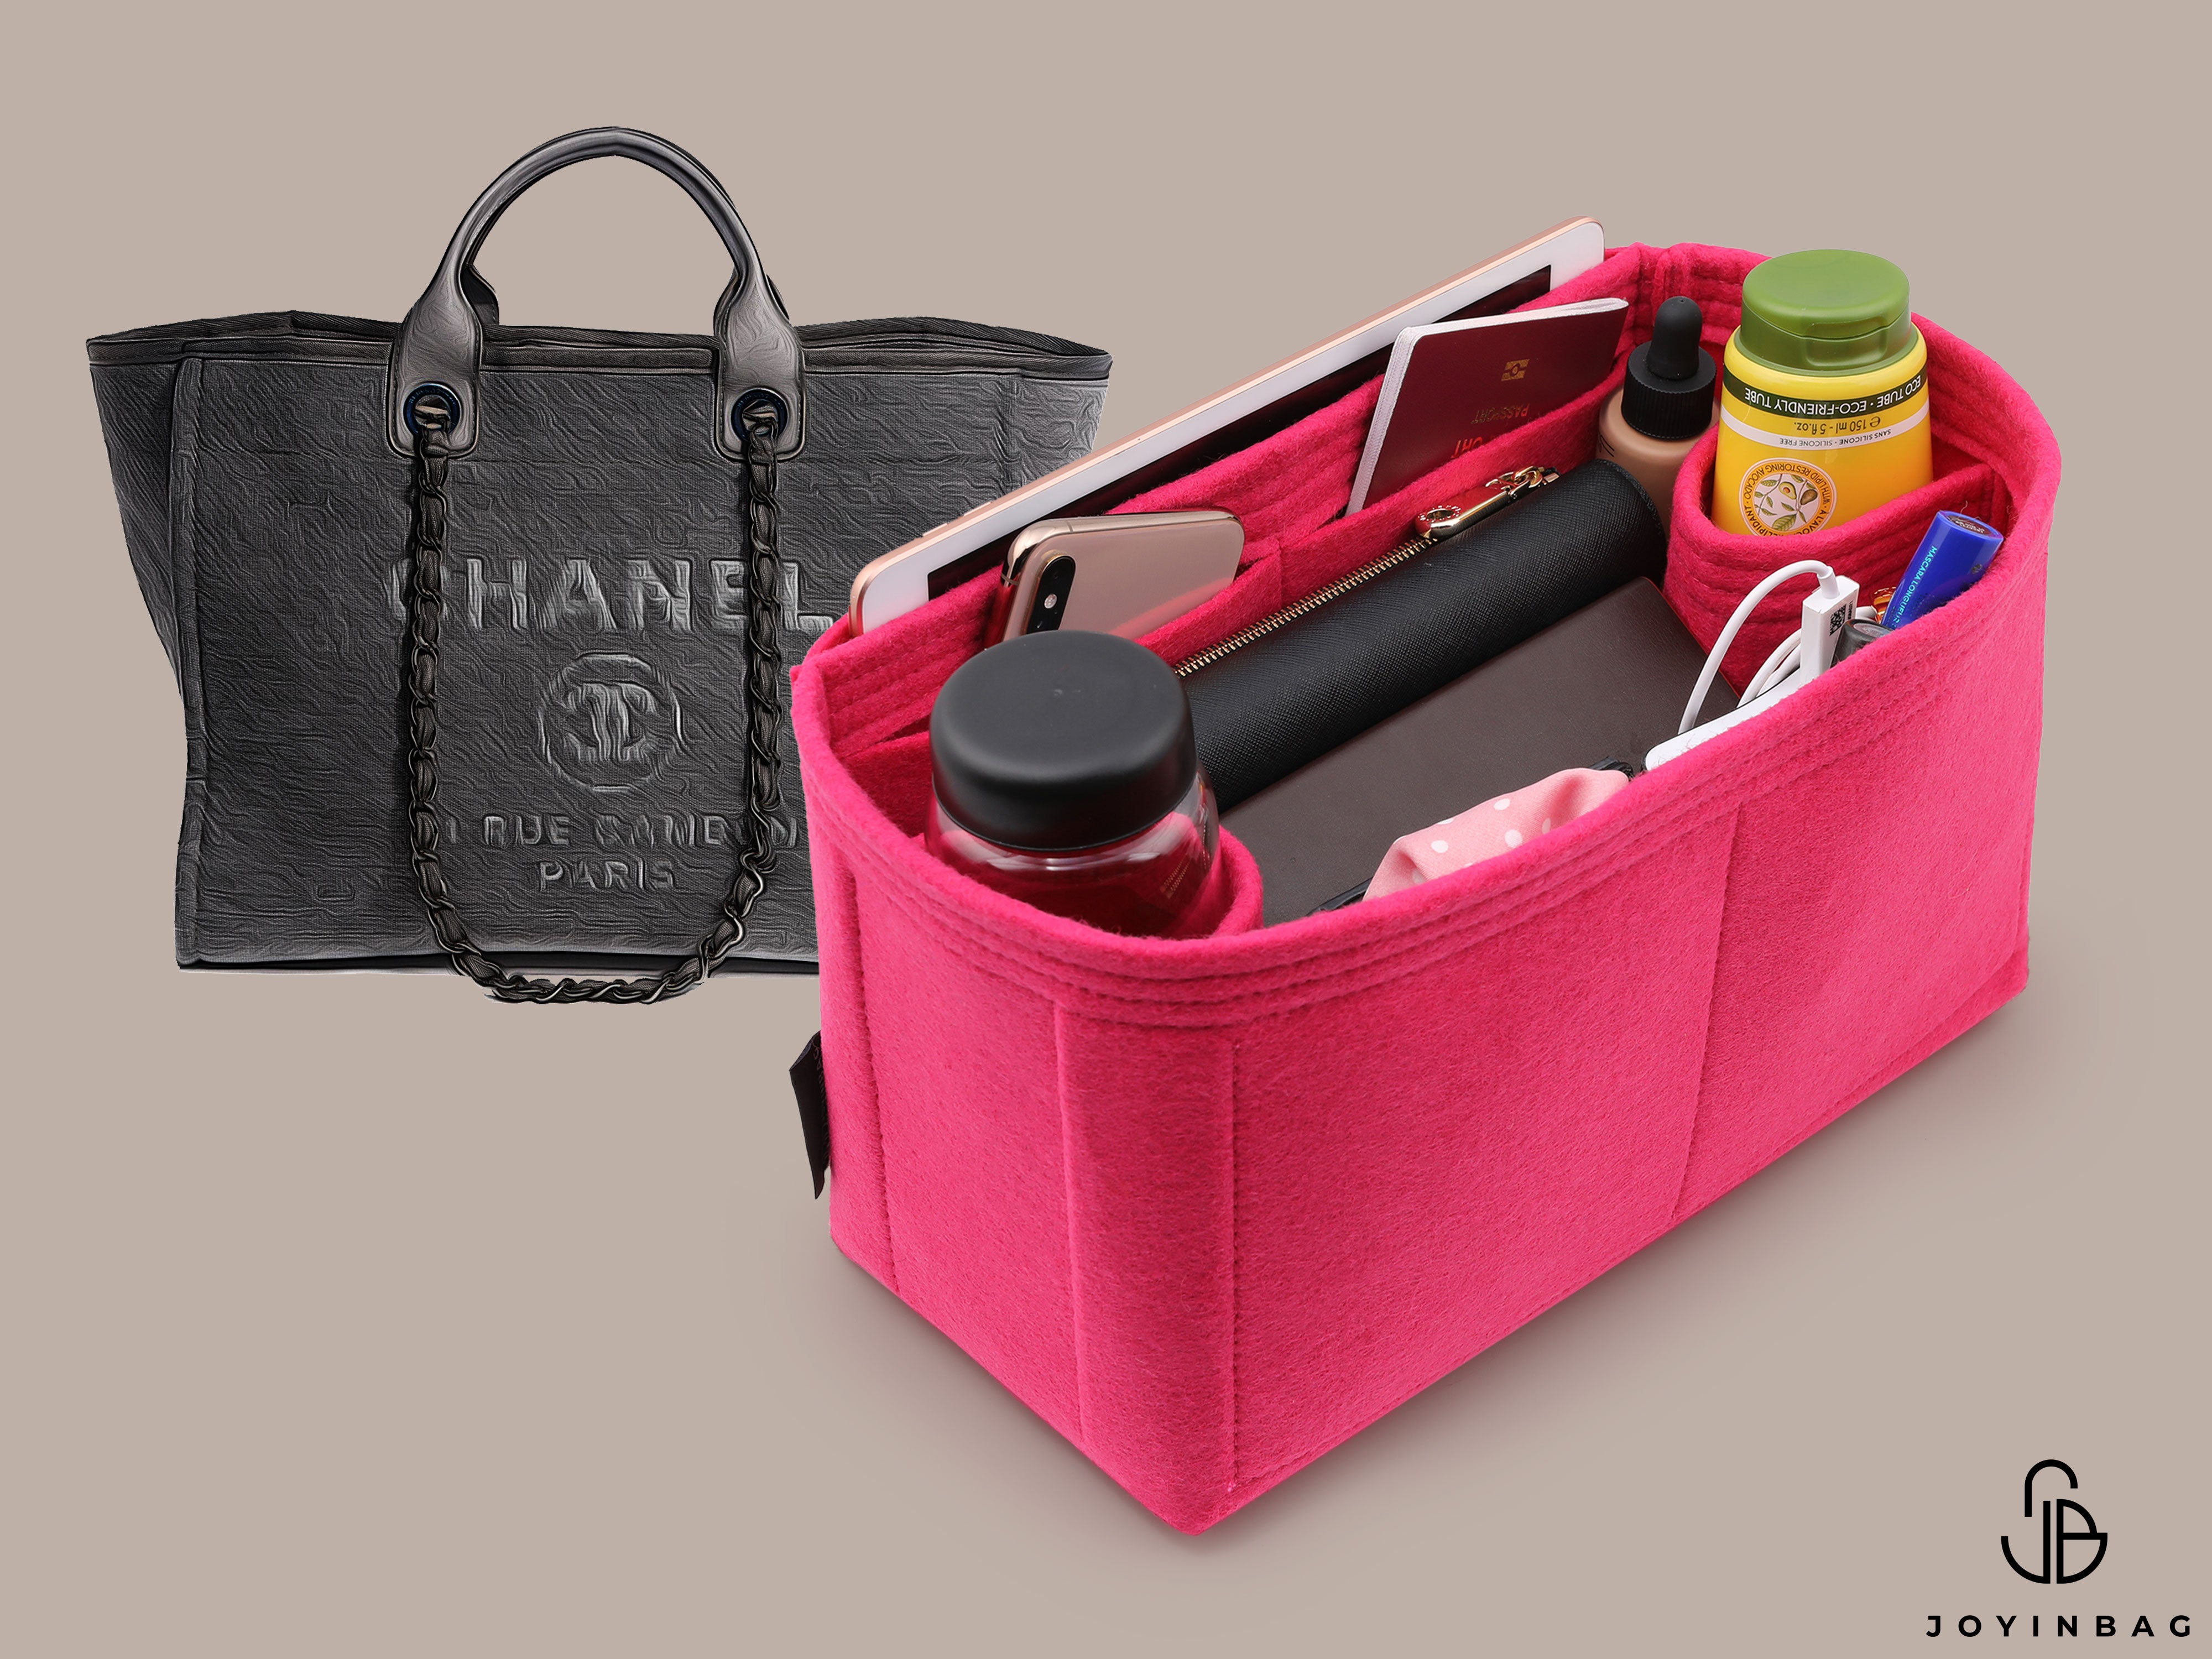  Bag Organizer for Chanel Deauville Tote (Large